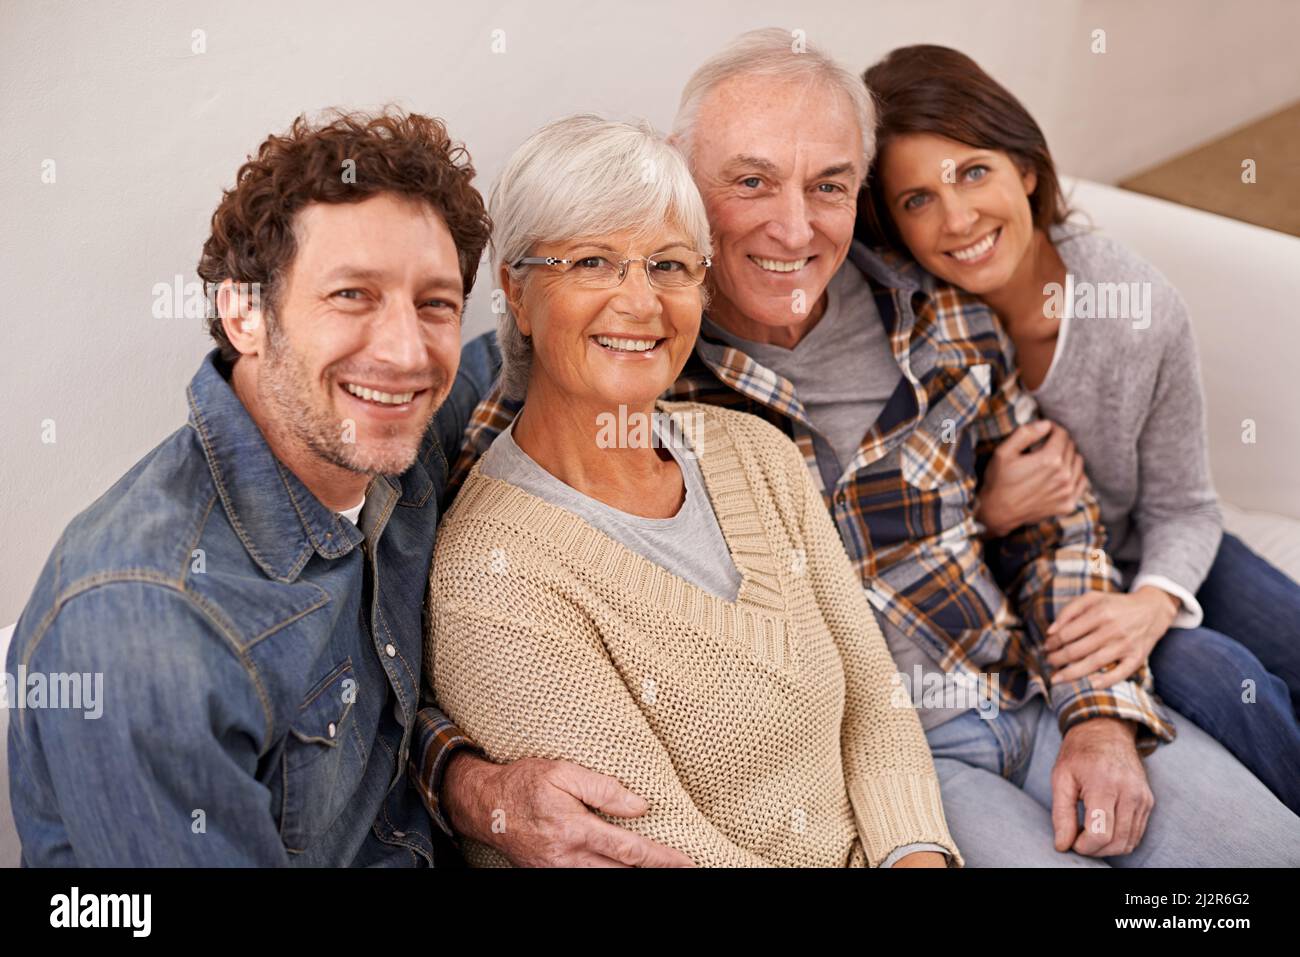 Spending time with mom and dad. A portrait of happy mature parents sitting with their adult children at home. Stock Photo